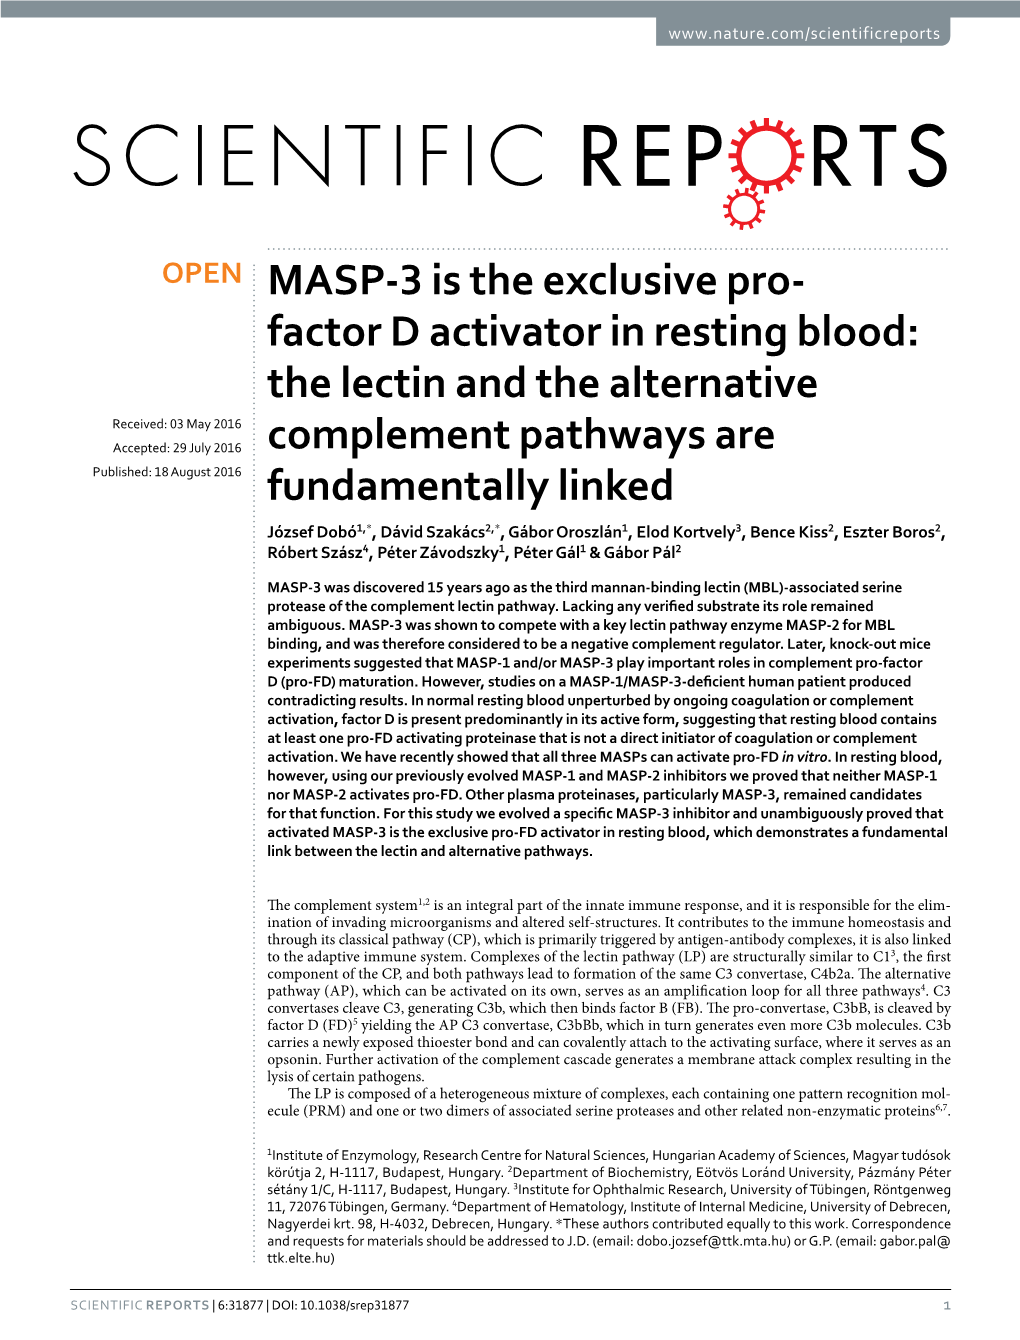 MASP-3 Is the Exclusive Pro-Factor D Activator in Resting Blood: the Lectin and the Alternative Complement Pathways Are Fundamentally Linked